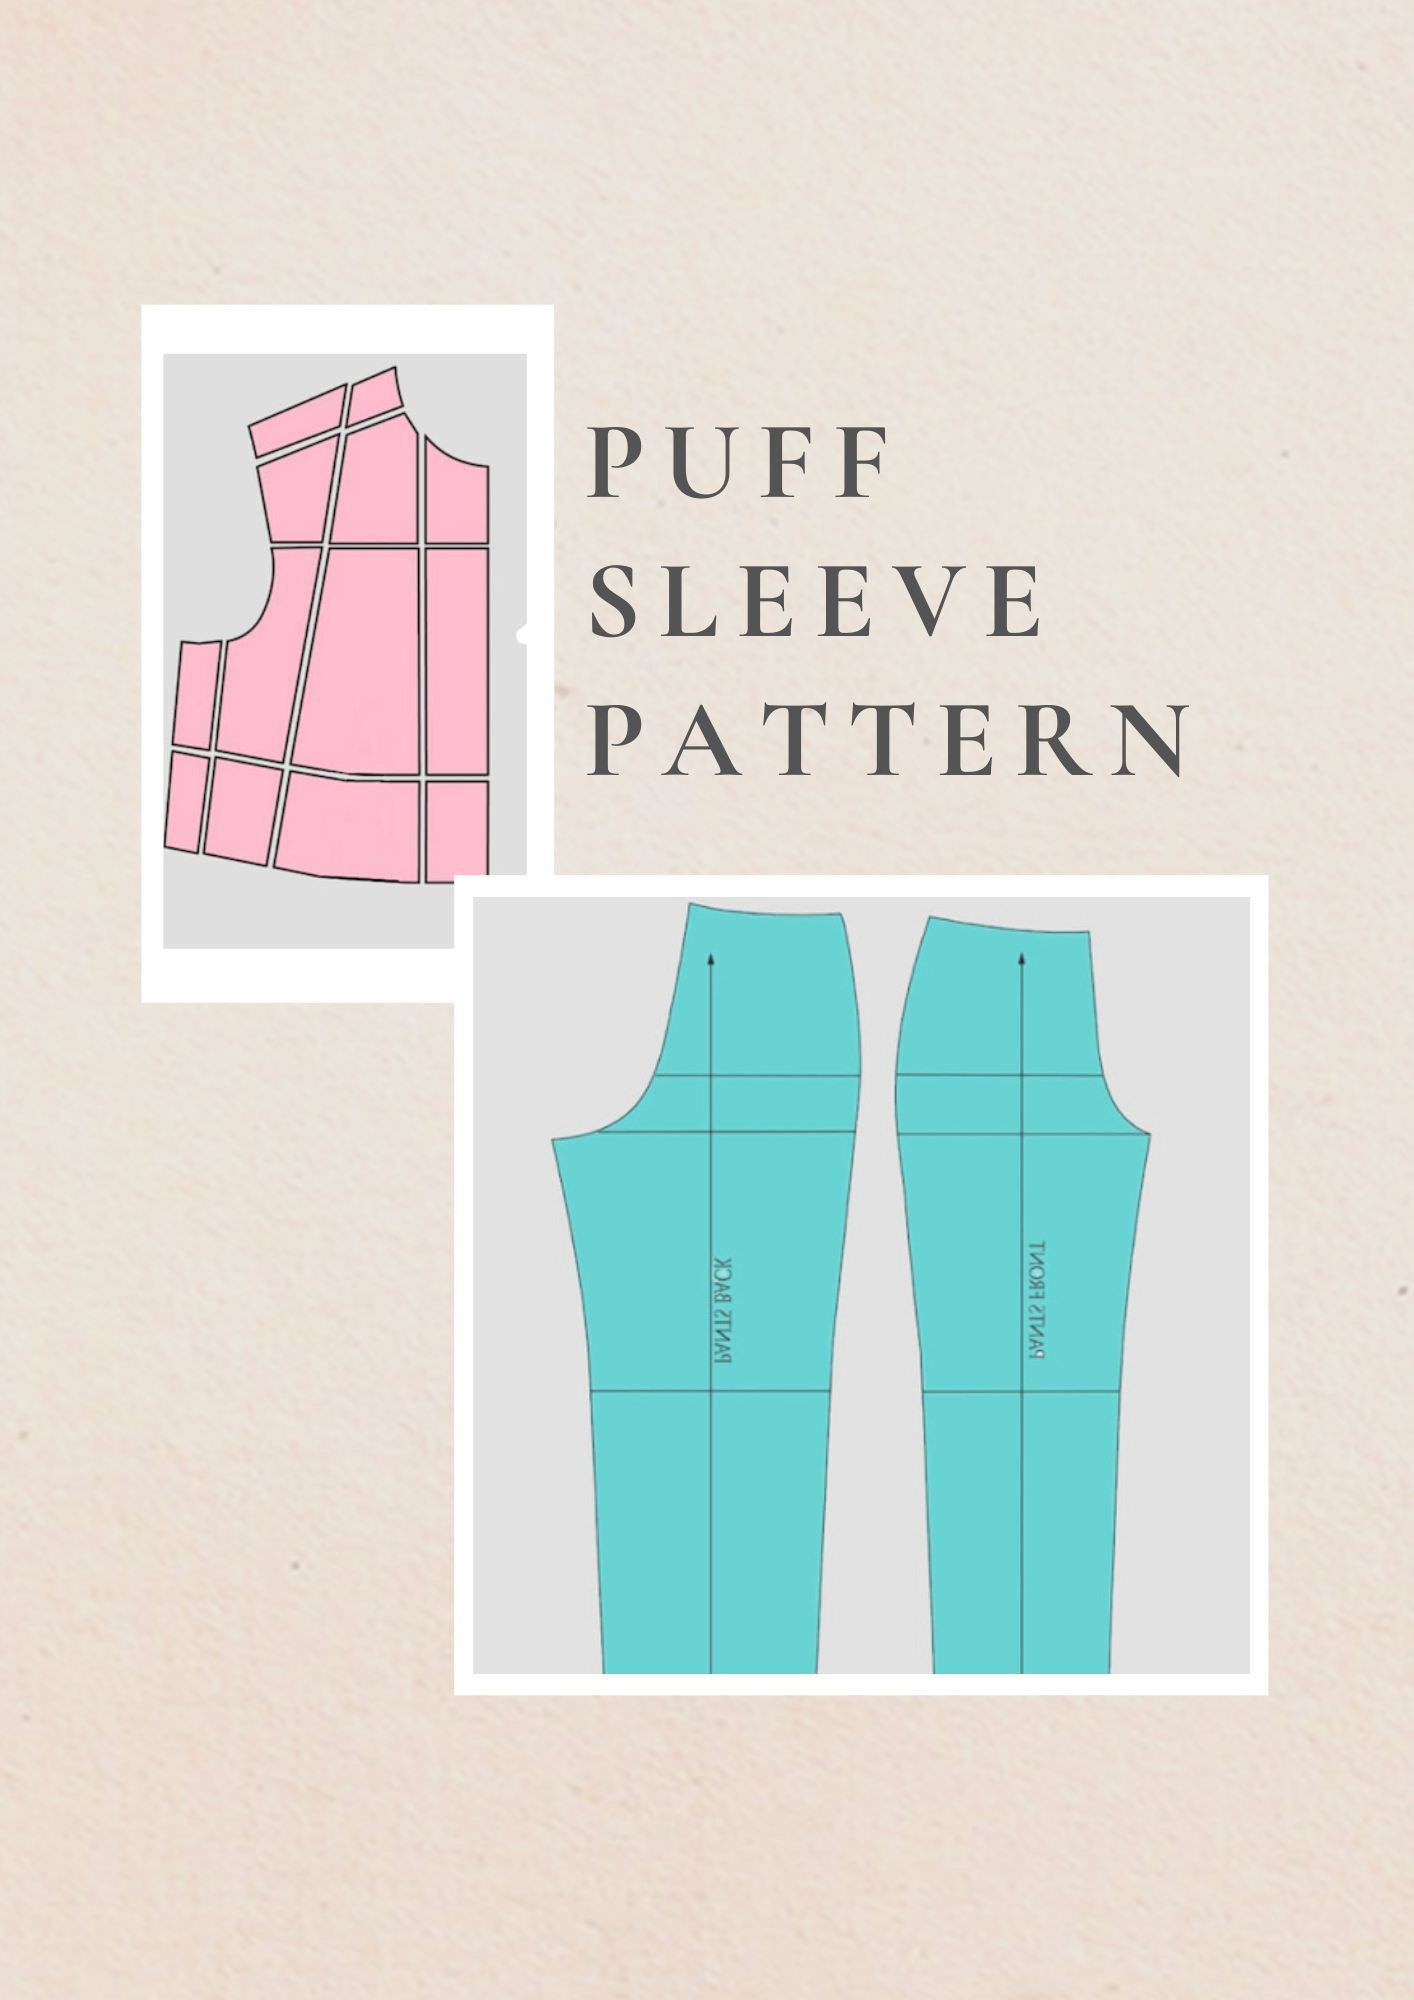 sewing pattern and diagram for bridal sleeves with puff and pleats for volume